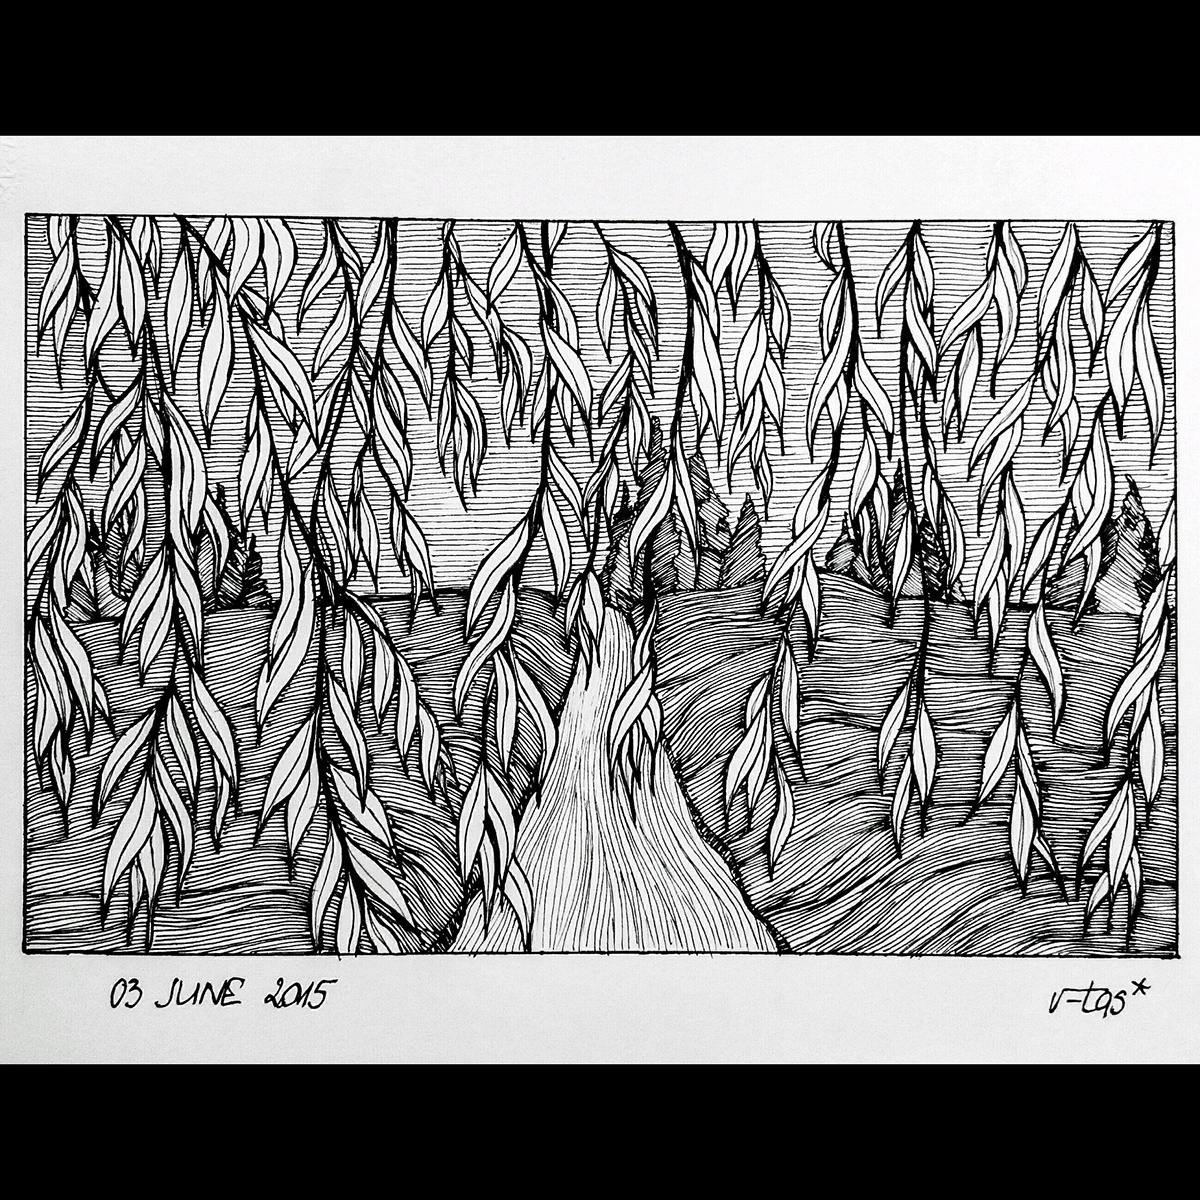 hatching fine lines lines graphics challenge drawing challenge a drawing a Day daily drawing free hand Nature people mountains creative Original